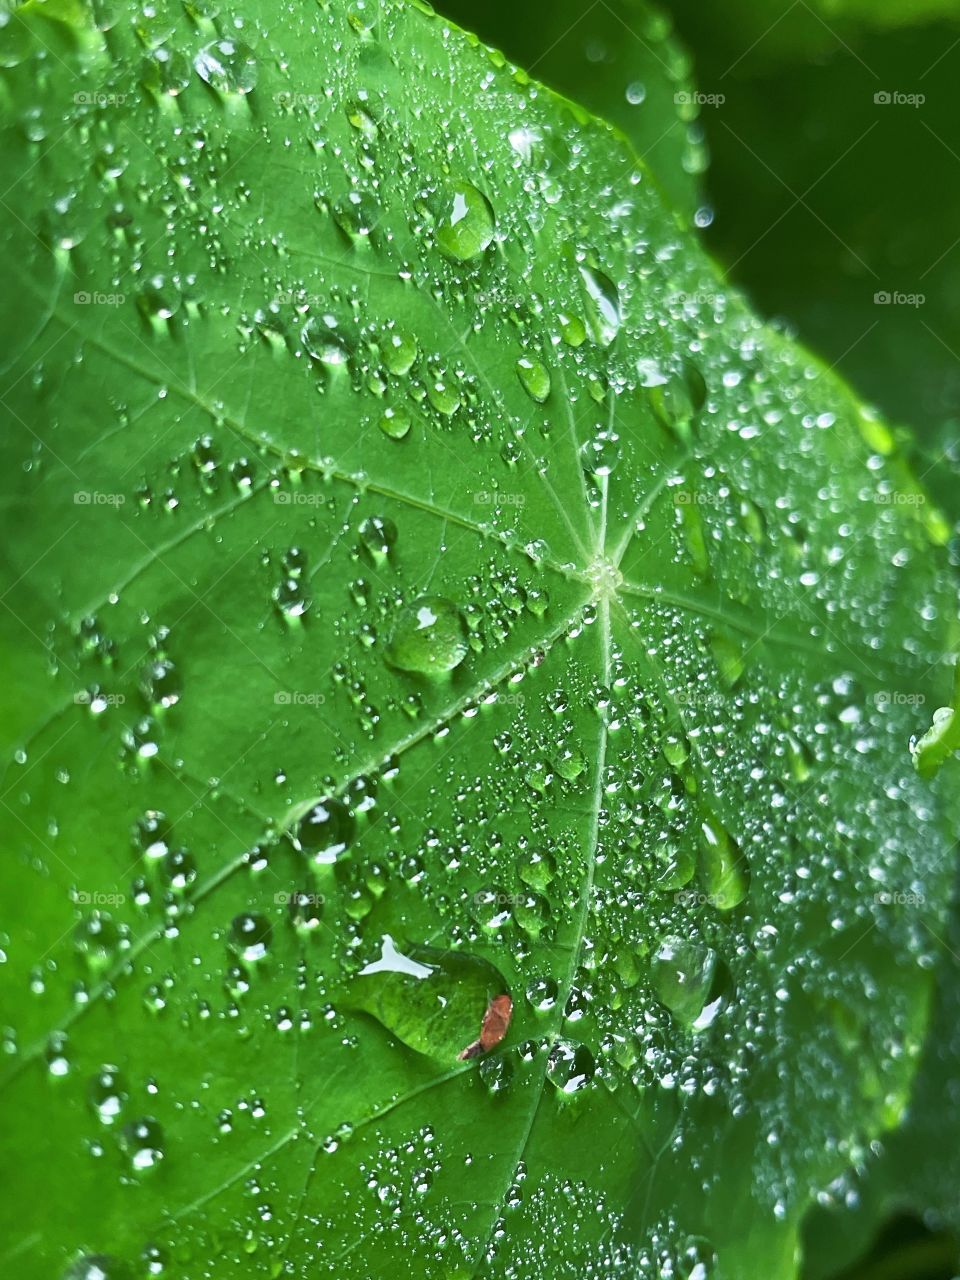 leaf rainfall green raindrops waterdrops droplets wet water rain drop outside nature outdoors elements dew dewdrops plant plants leafs Grass splashes phone photography